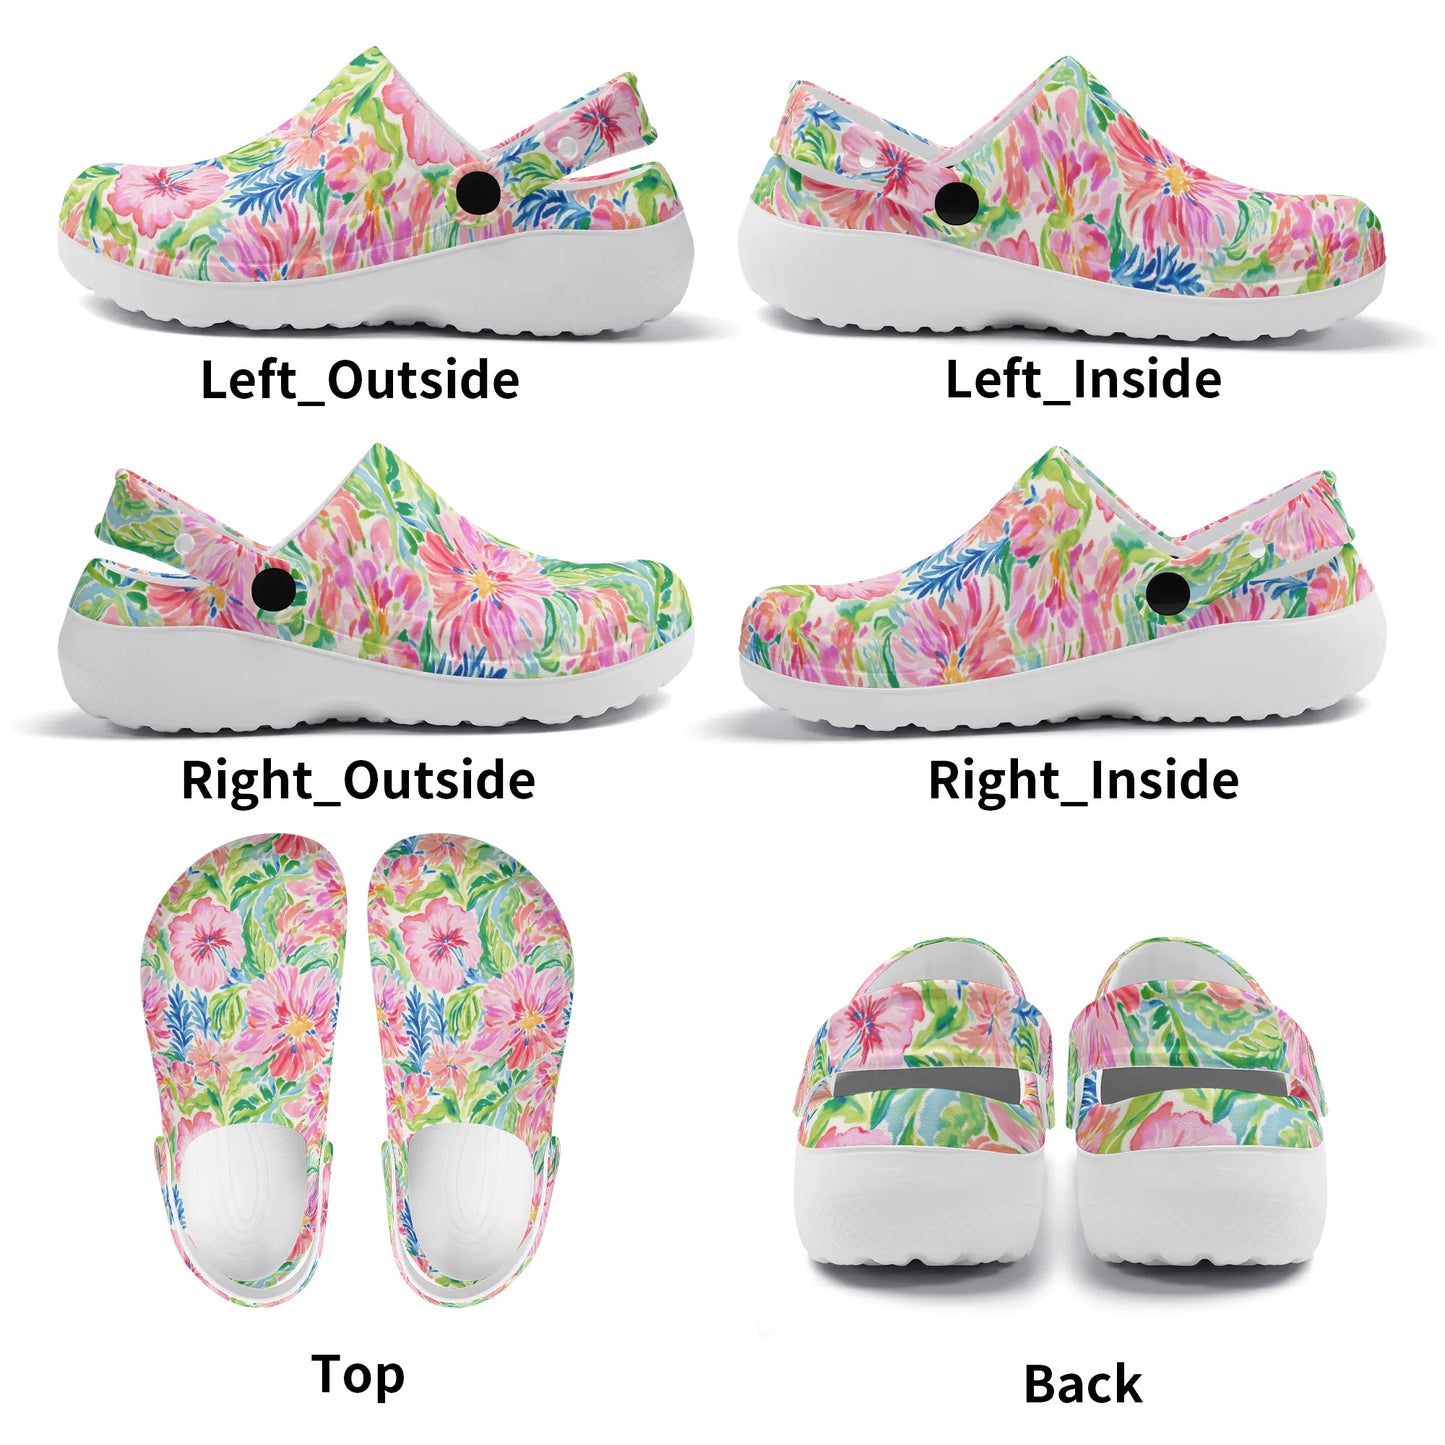 Pastel Oasis: Watercolor Hibiscus Flowers and Palms in Soft Hues Lightweight Slip On Nurse Style Clogs